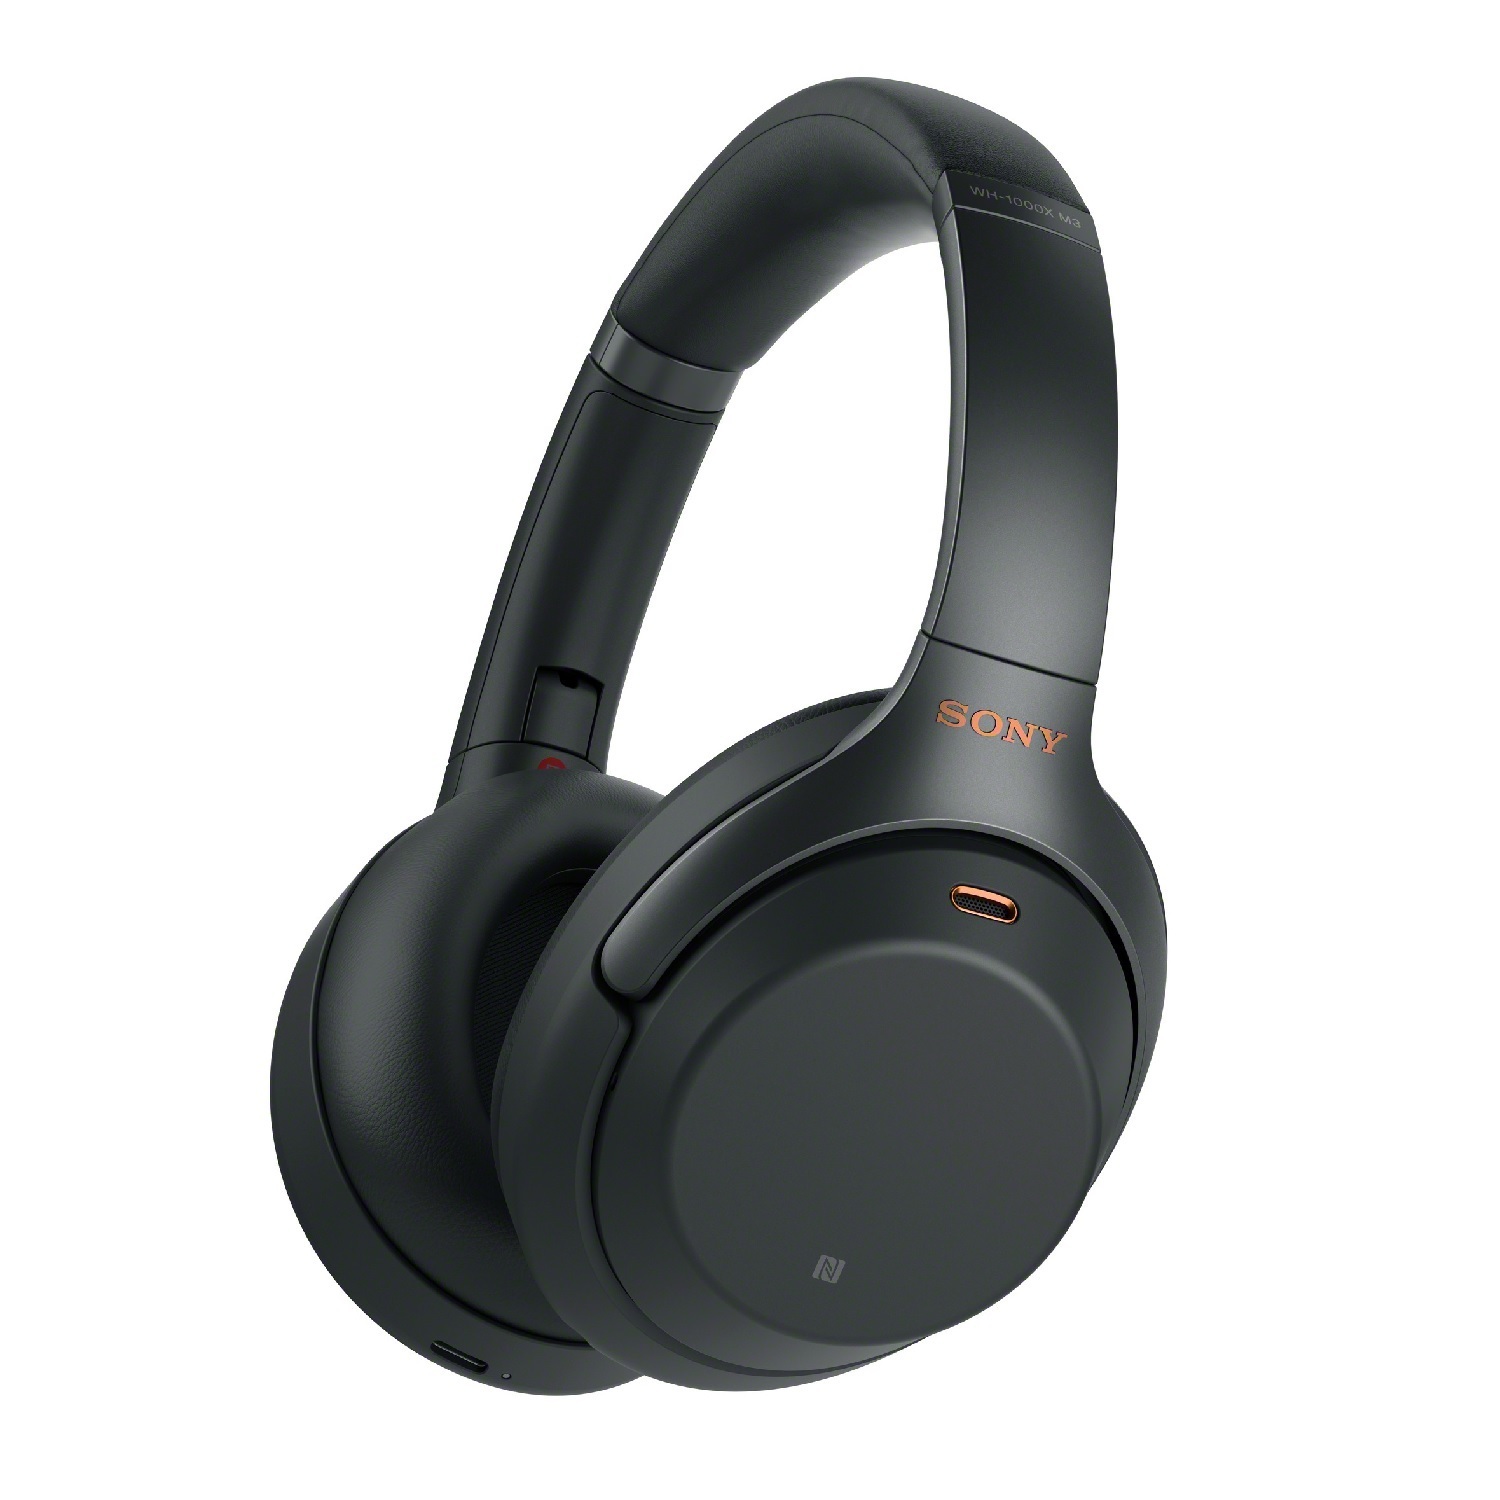 (Authorized Dealer) Sony WH-1000XM3 Wireless Noise-Canceling Headphones $199 + free s/h @ Focus Camera